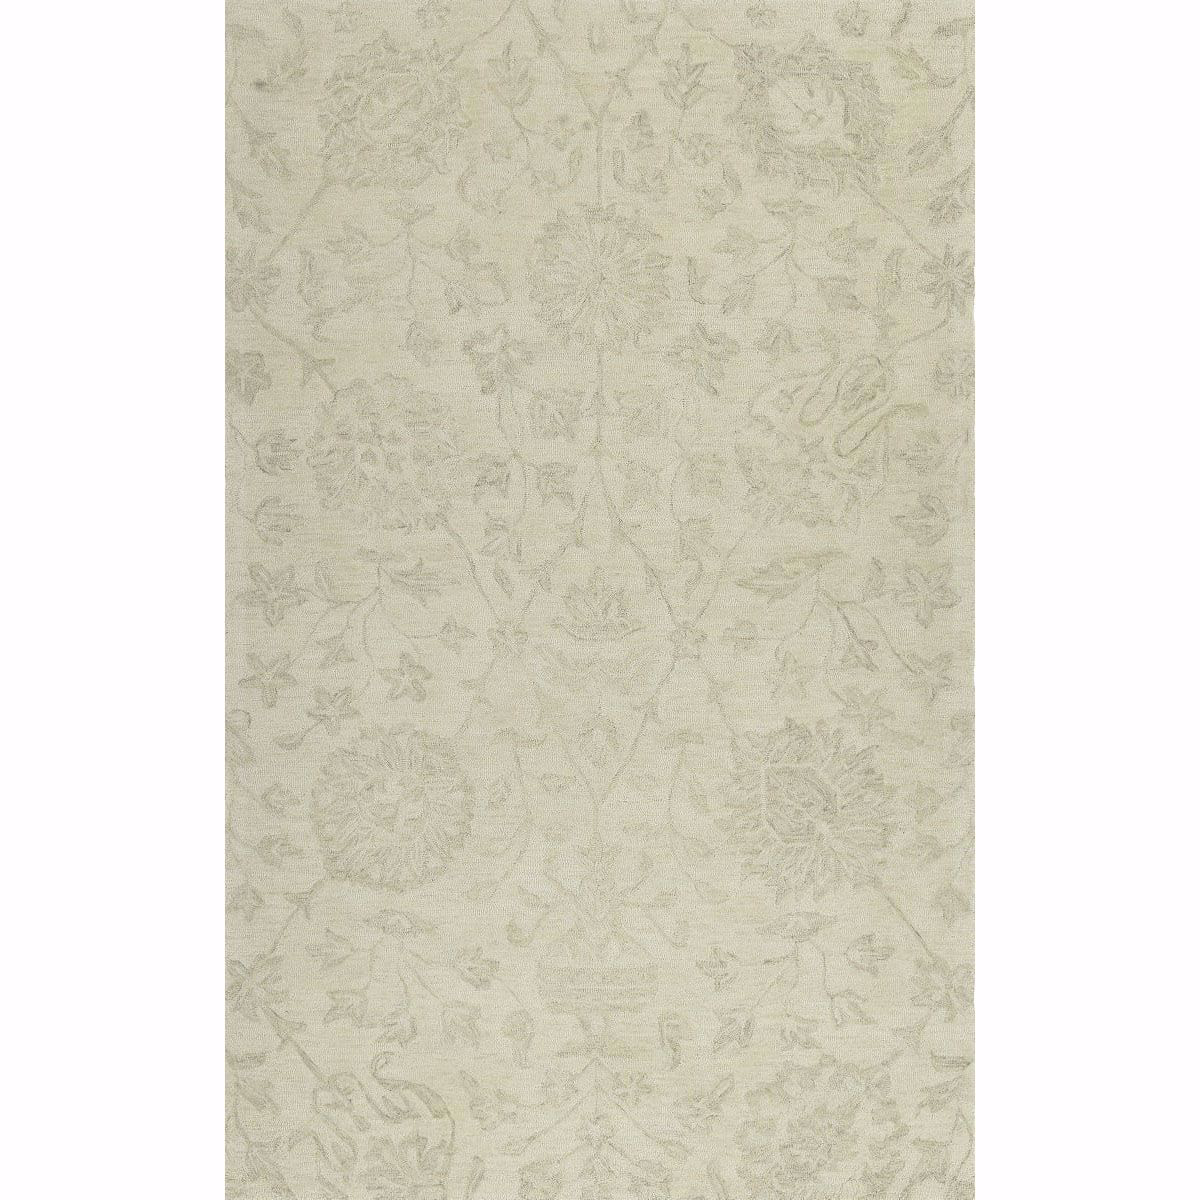 Picture of Korba I Ivory 5x8 Area Rug